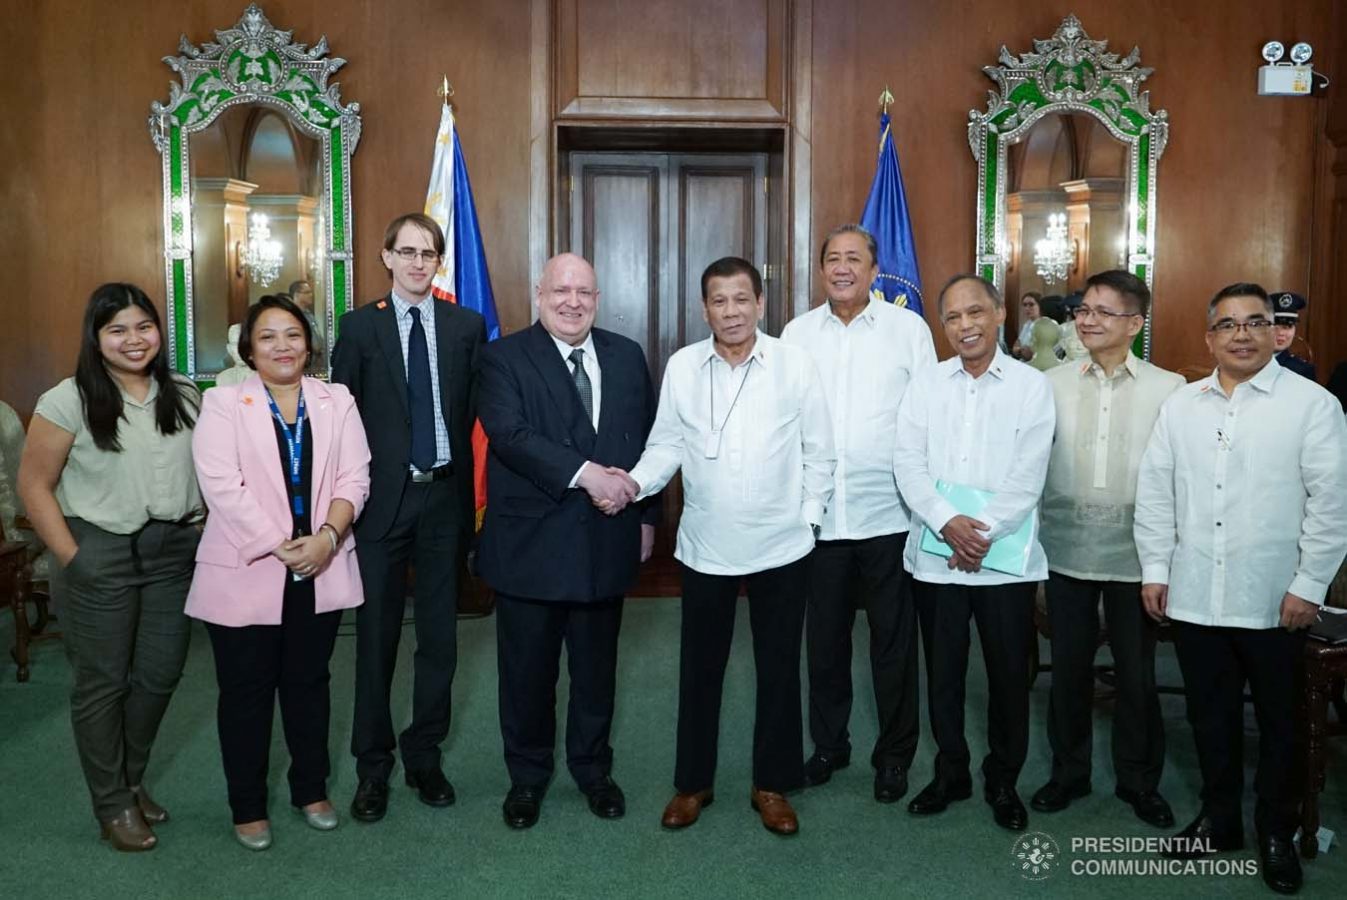 President Rodrigo Roa Duterte poses for posterity with outgoing New Zealand Ambassador to the Philippines David Strachan, who paid a farewell call on the President at the Malacañan Palace on January 27, 2020. KING RODRIGUEZ/PRESIDENTIAL PHOTO